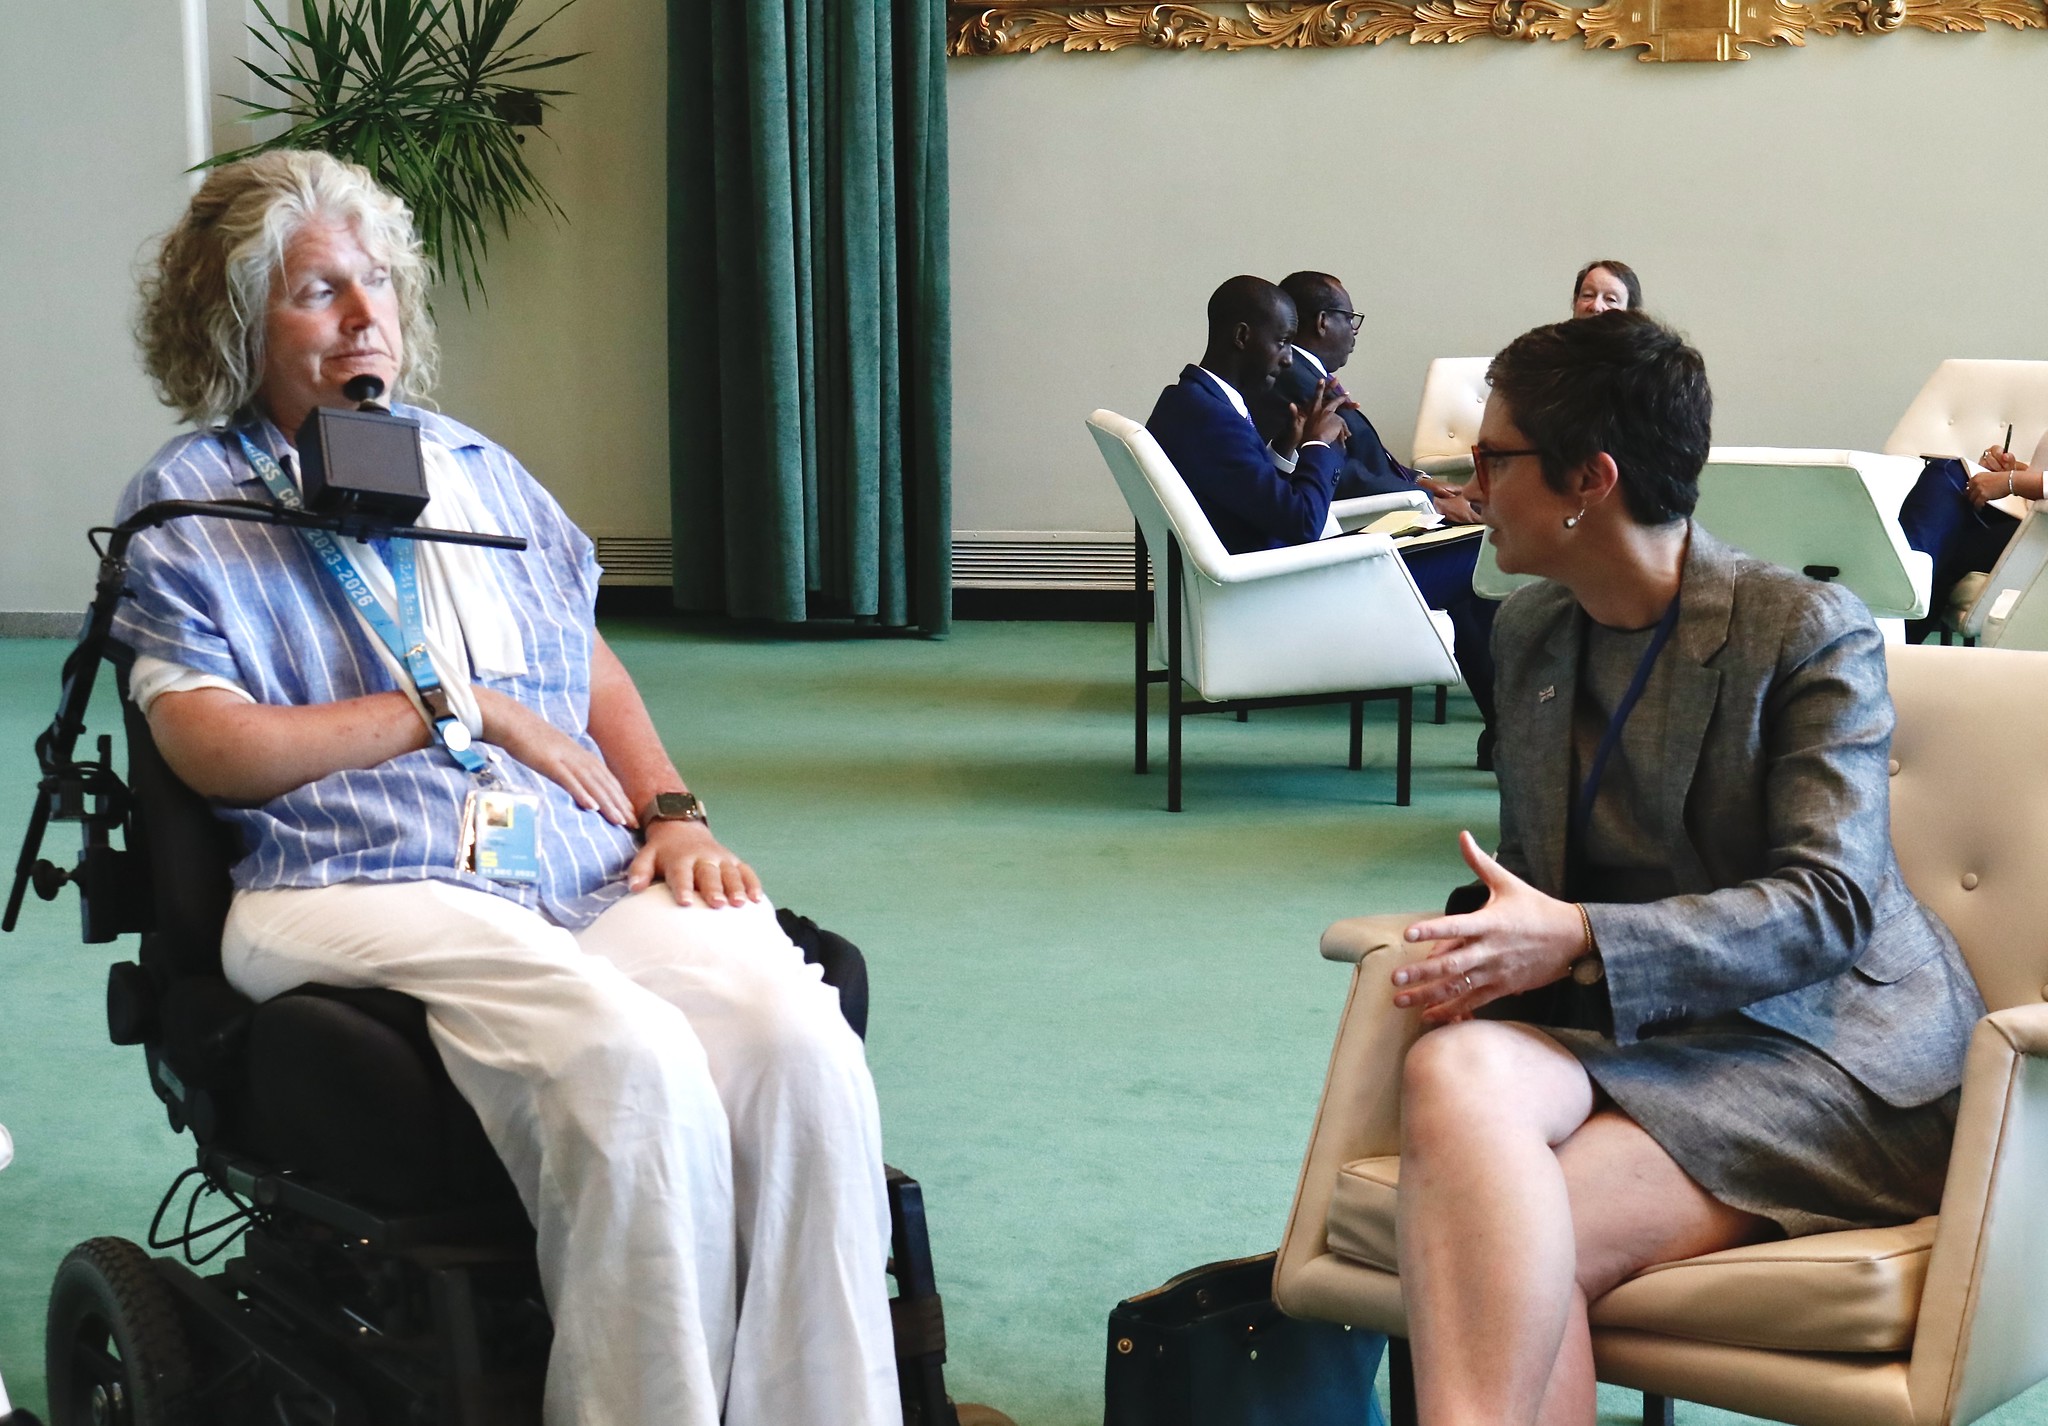 The Minister for Disabled People is sat in a green carpeted room with her legs crossed in a grey suit and skirt, she is facing and talking with Rosemary Kayess, Chair of the UNCRPD Committee. Rosemary is wearing white trousers and a blue top and is sat in a motorised wheelchair with her arm in a white sling and a chin support support her head.